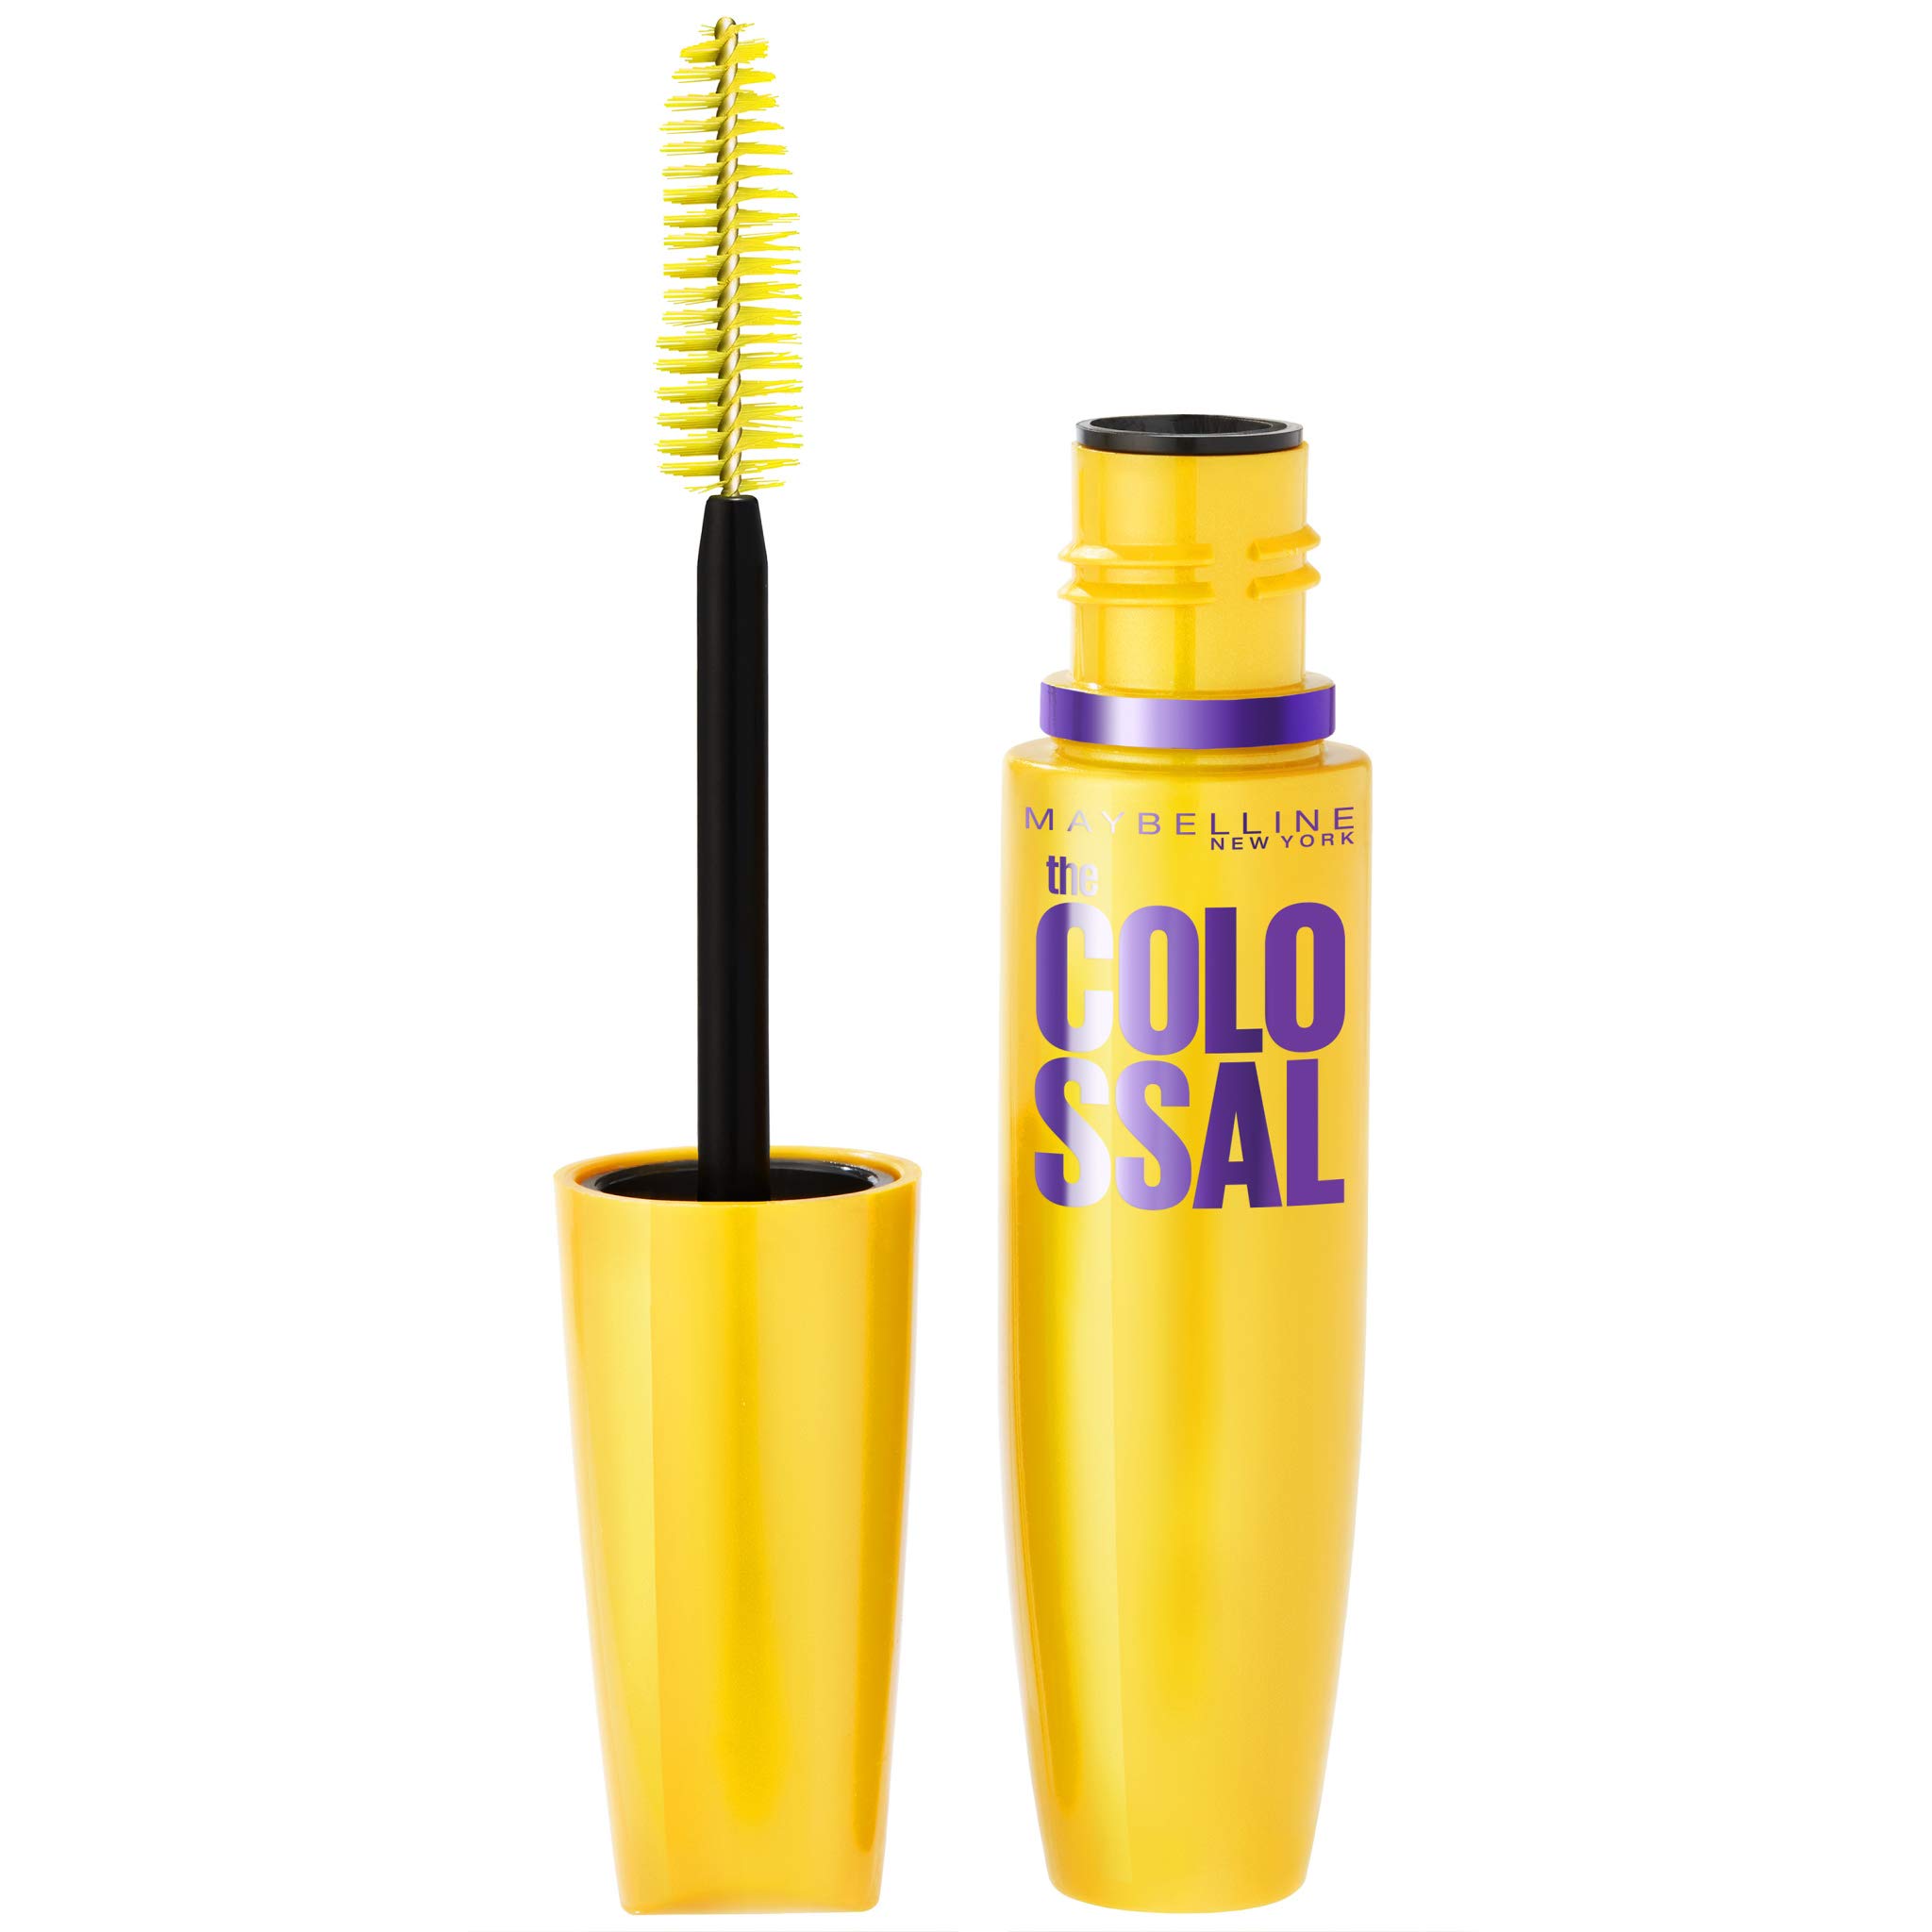 Maybelline New York Volum' Express Colossal Washable Mascara Makeup, Classic Black Mascara, 1 Count